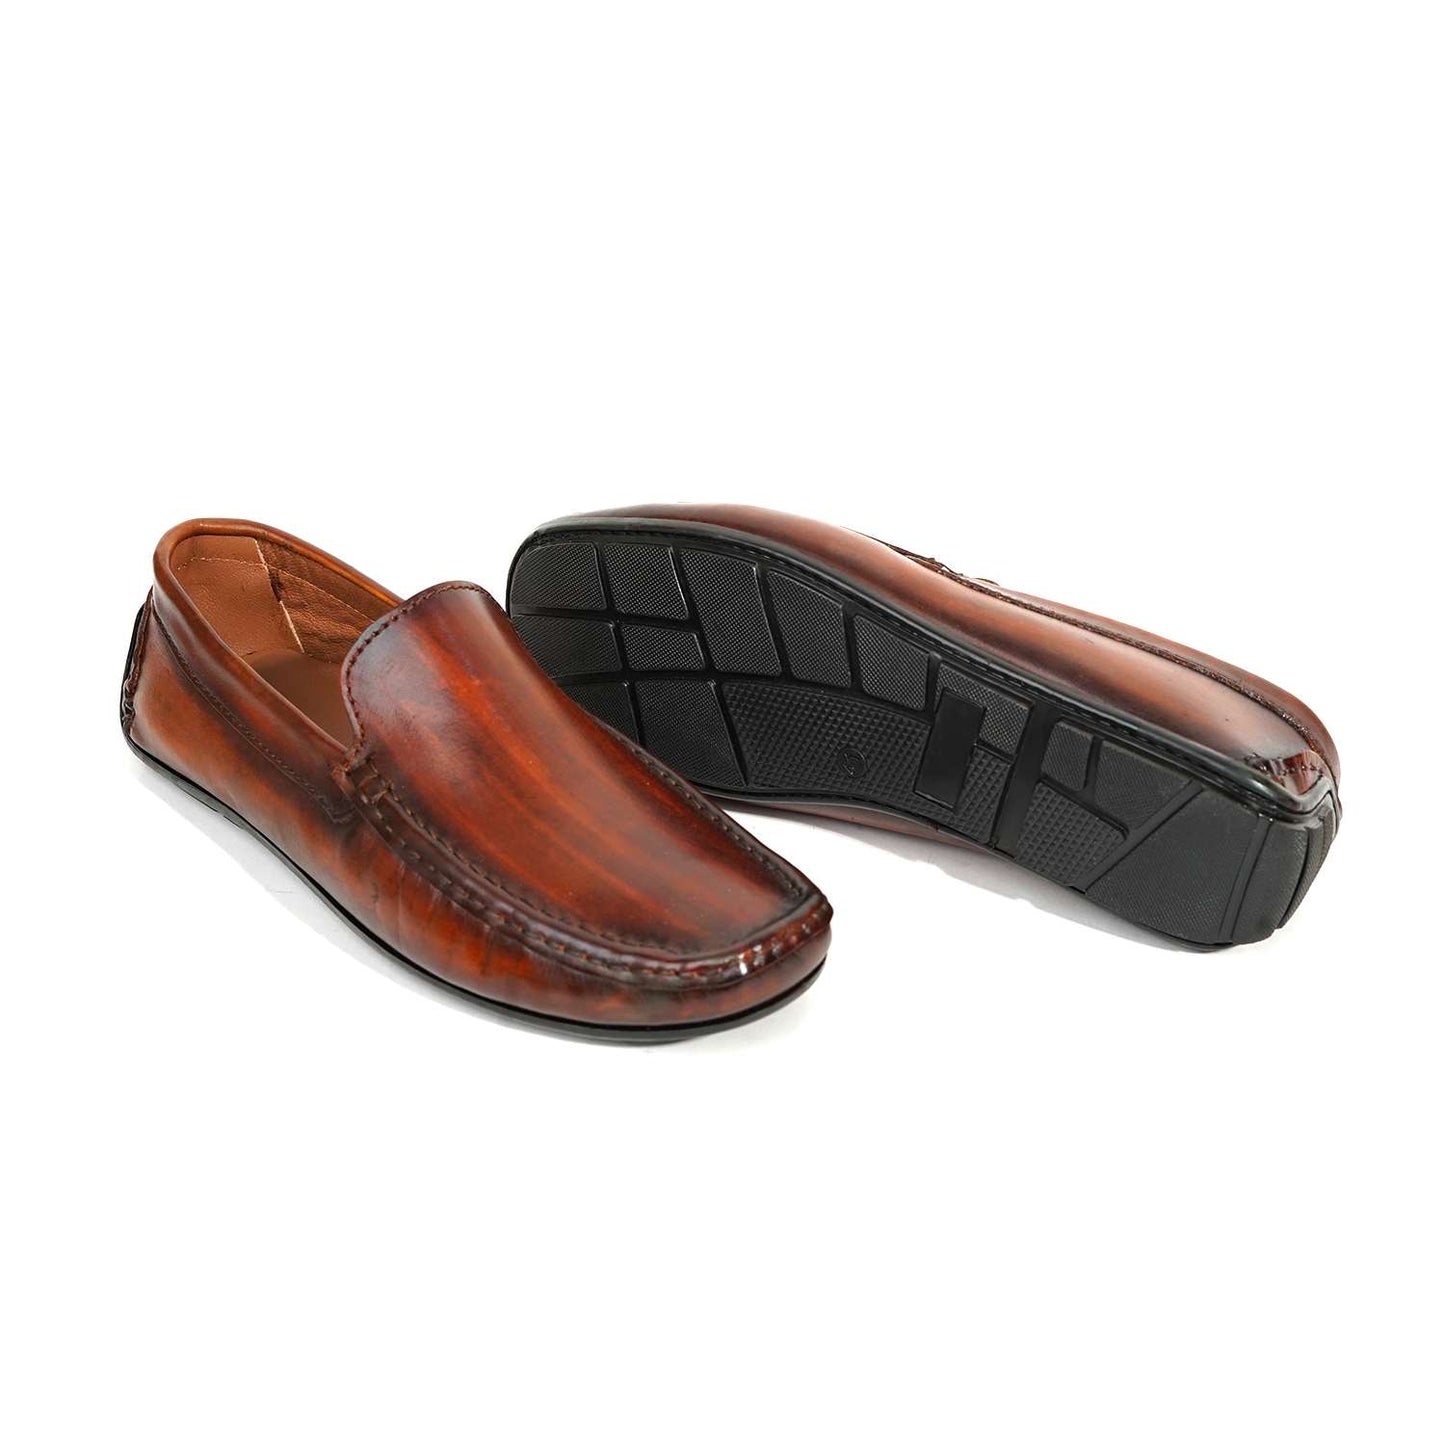 Day-To-Day Basic Loafers Stripes